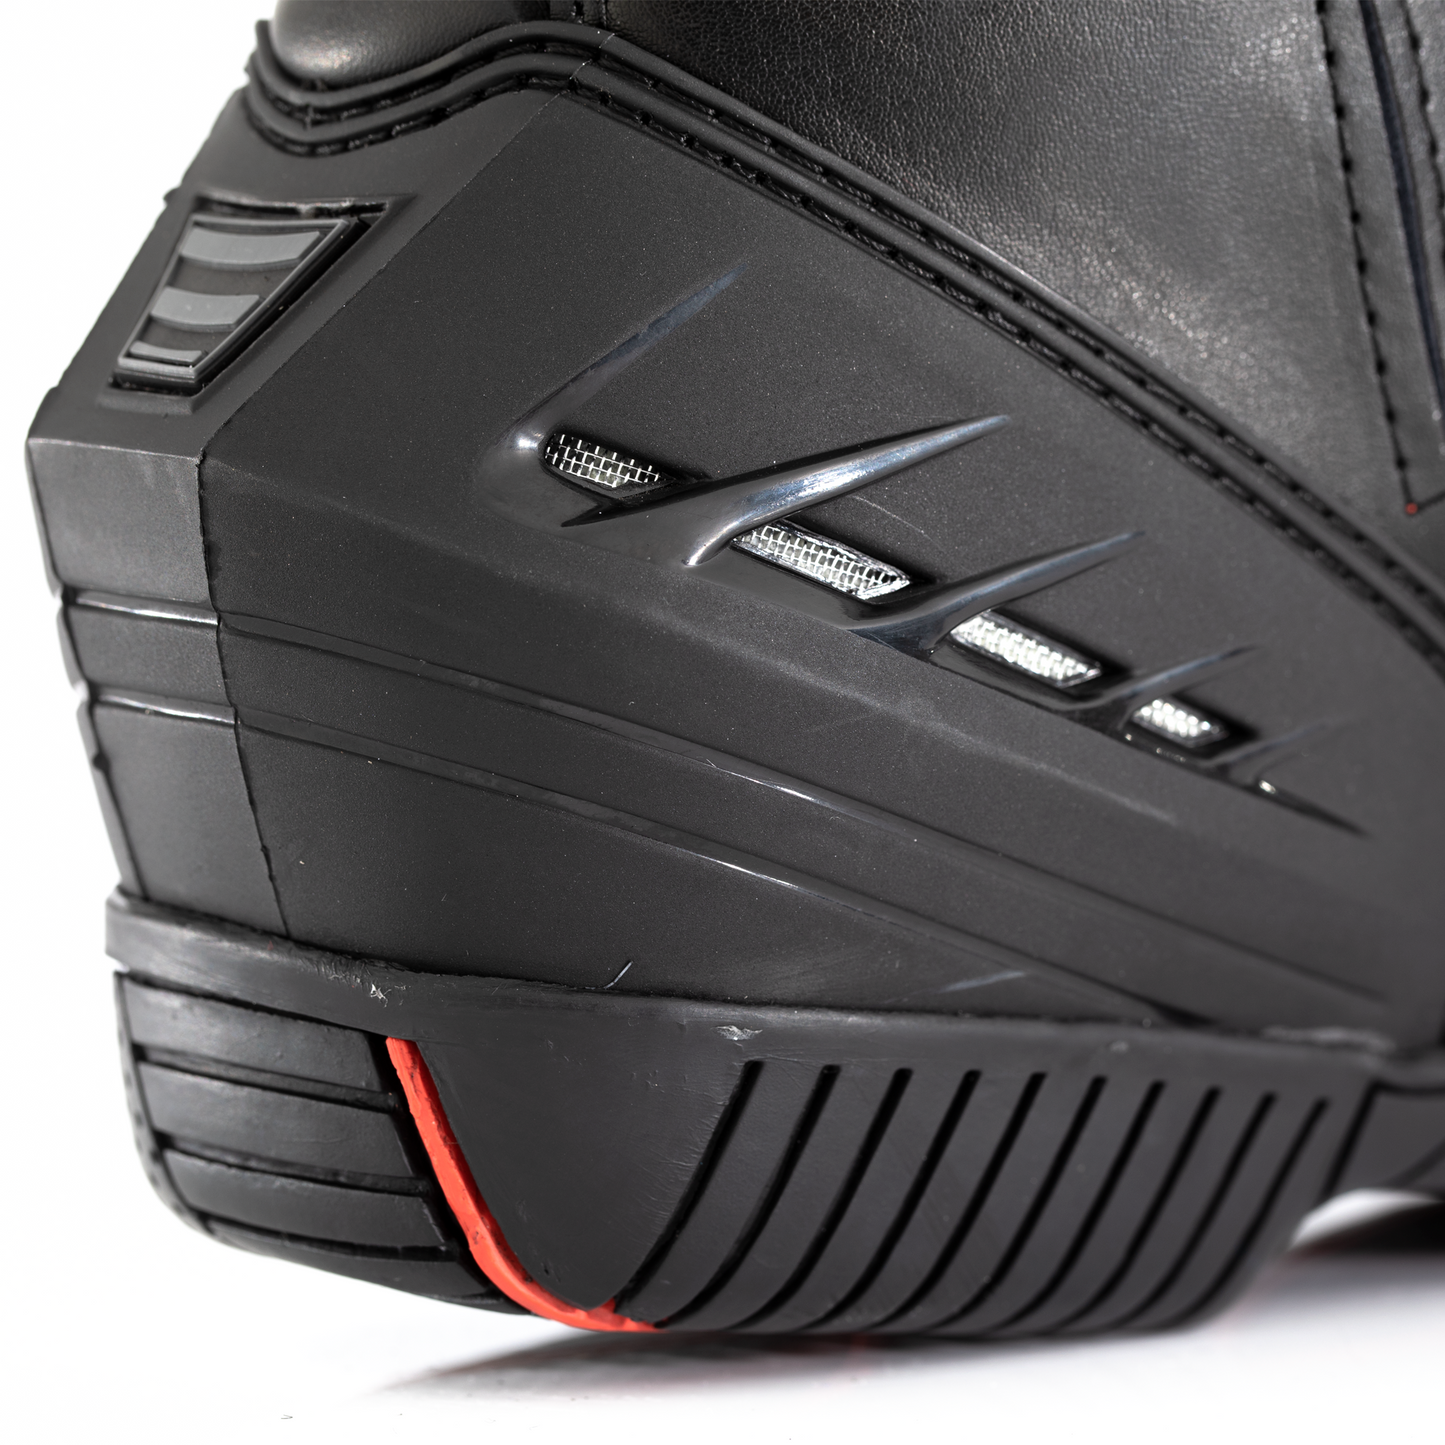 RST Paragon 2 II Leather WaterProof Motorcycle Boots - CE APPROVED - Black